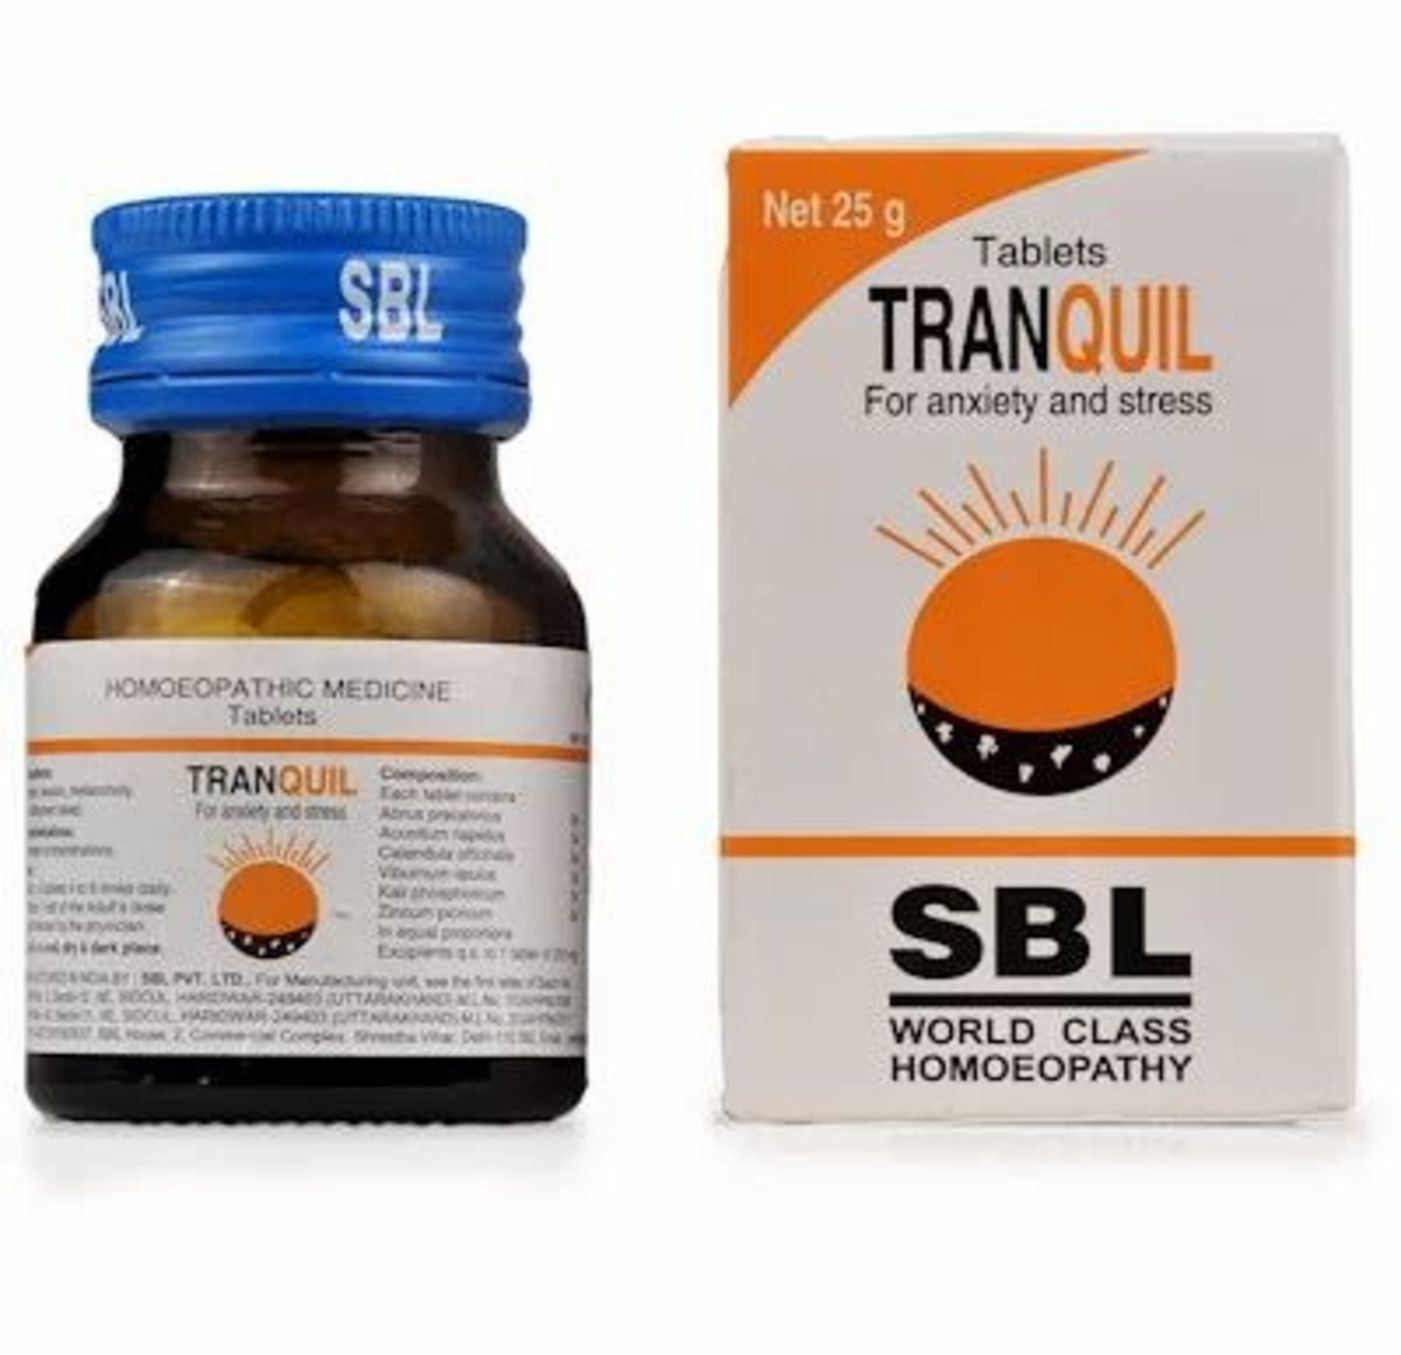 SBL Tranquil Tablet Homeopathic Medicine